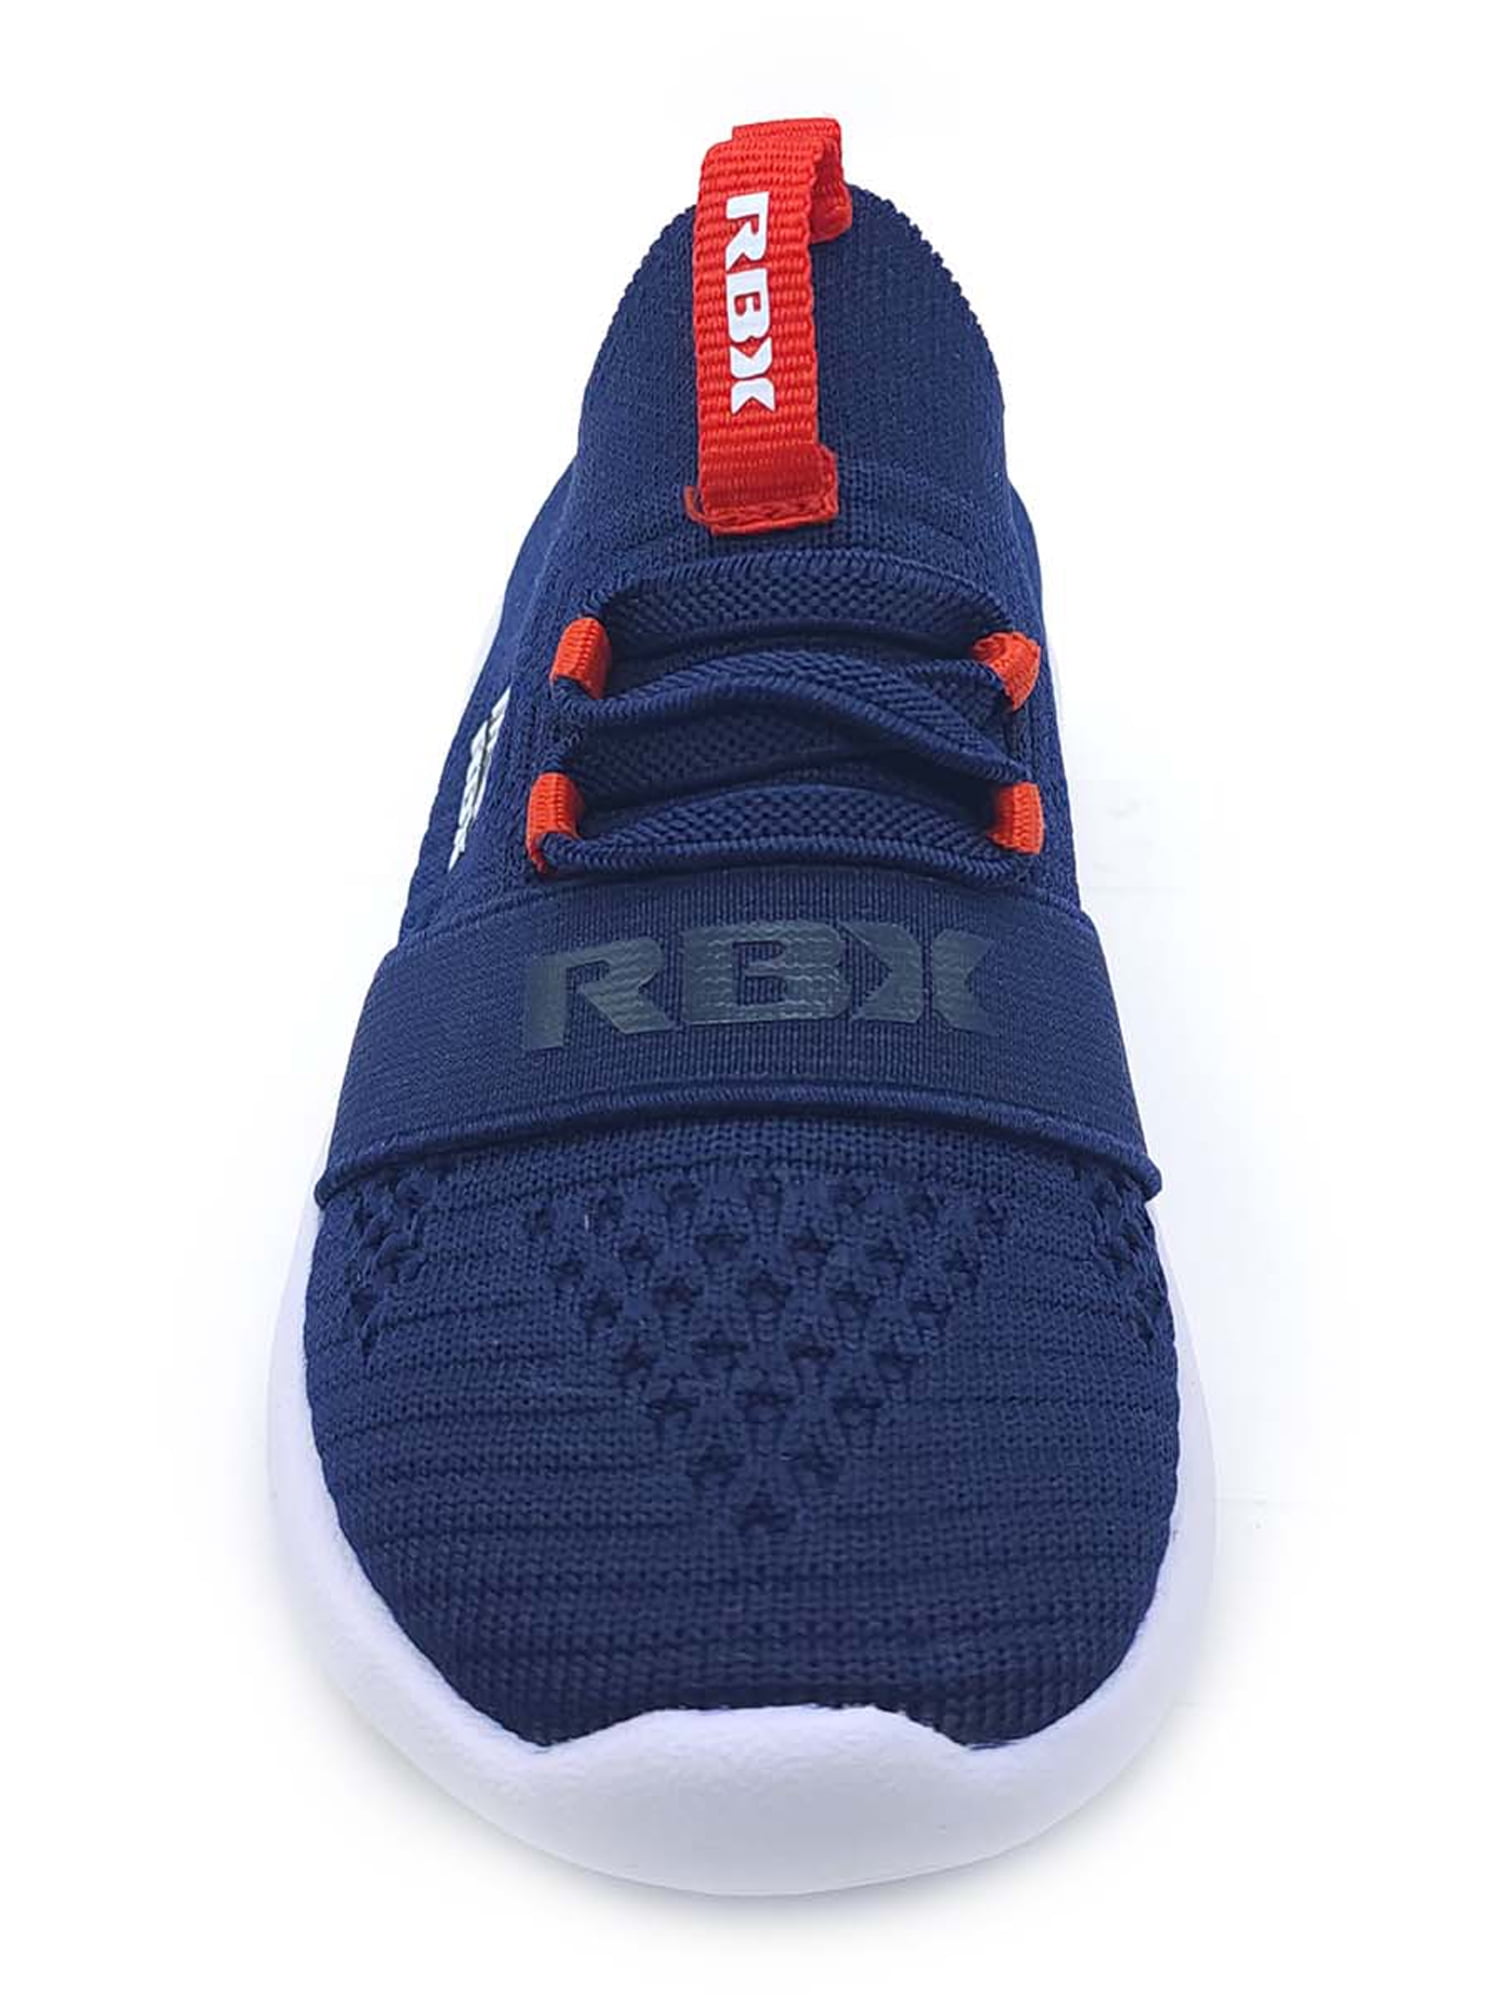 RBX Toddler Boys Knitted Slip-On Sneakers